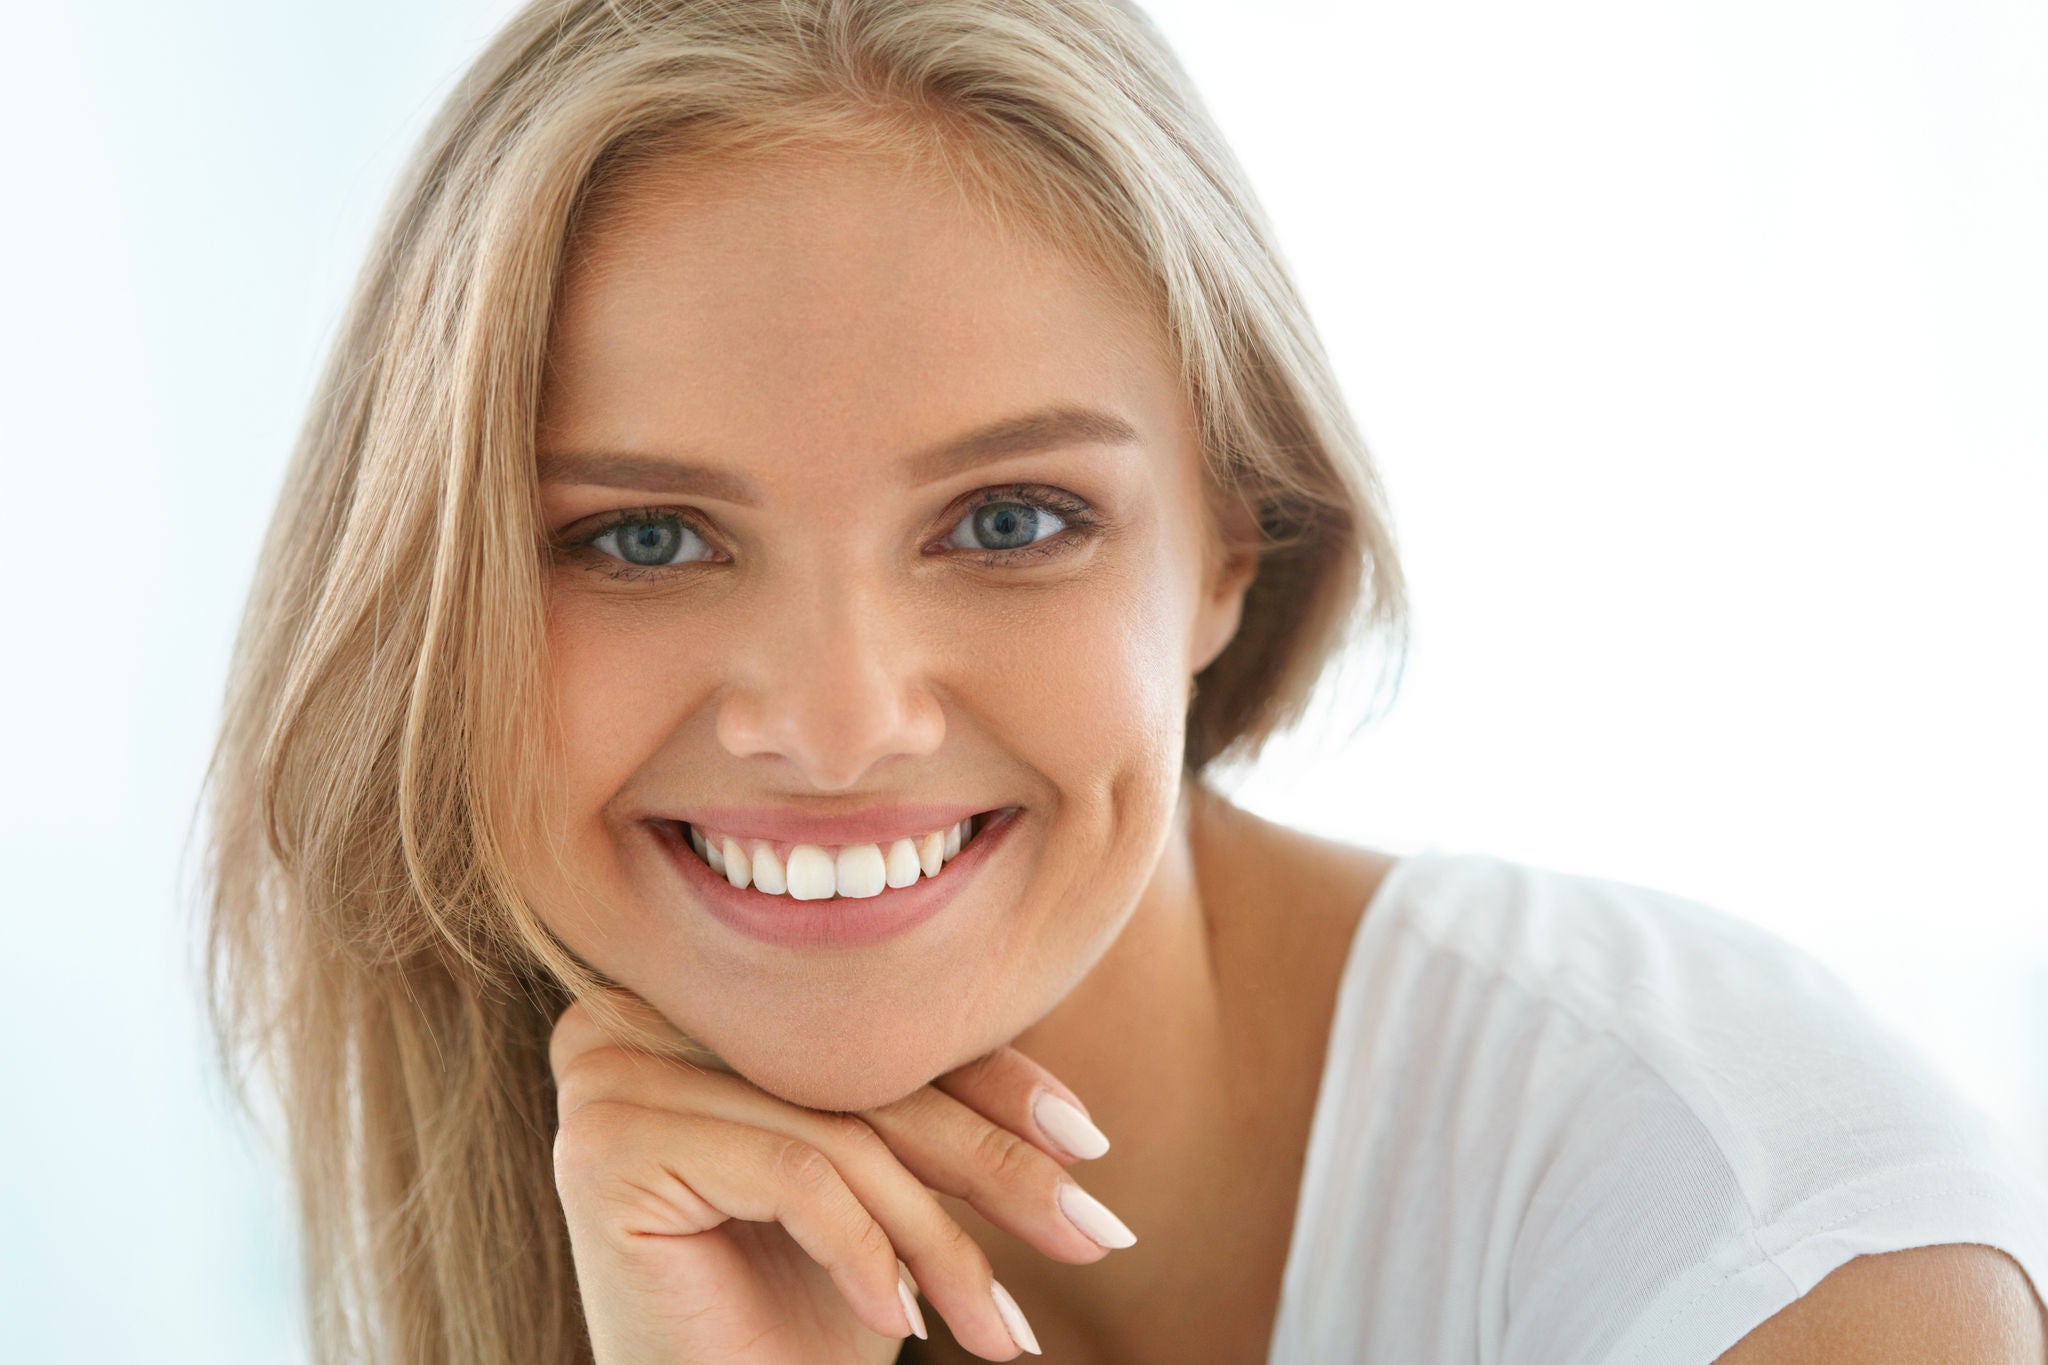 Beautiful Woman Smiling. Portrait Of Attractive Happy Healthy Girl With Perfect Smile, White Teeth, Blonde Hair And Fresh Face Smiling Indoors. Beauty And Health Concept. High Resolution Image